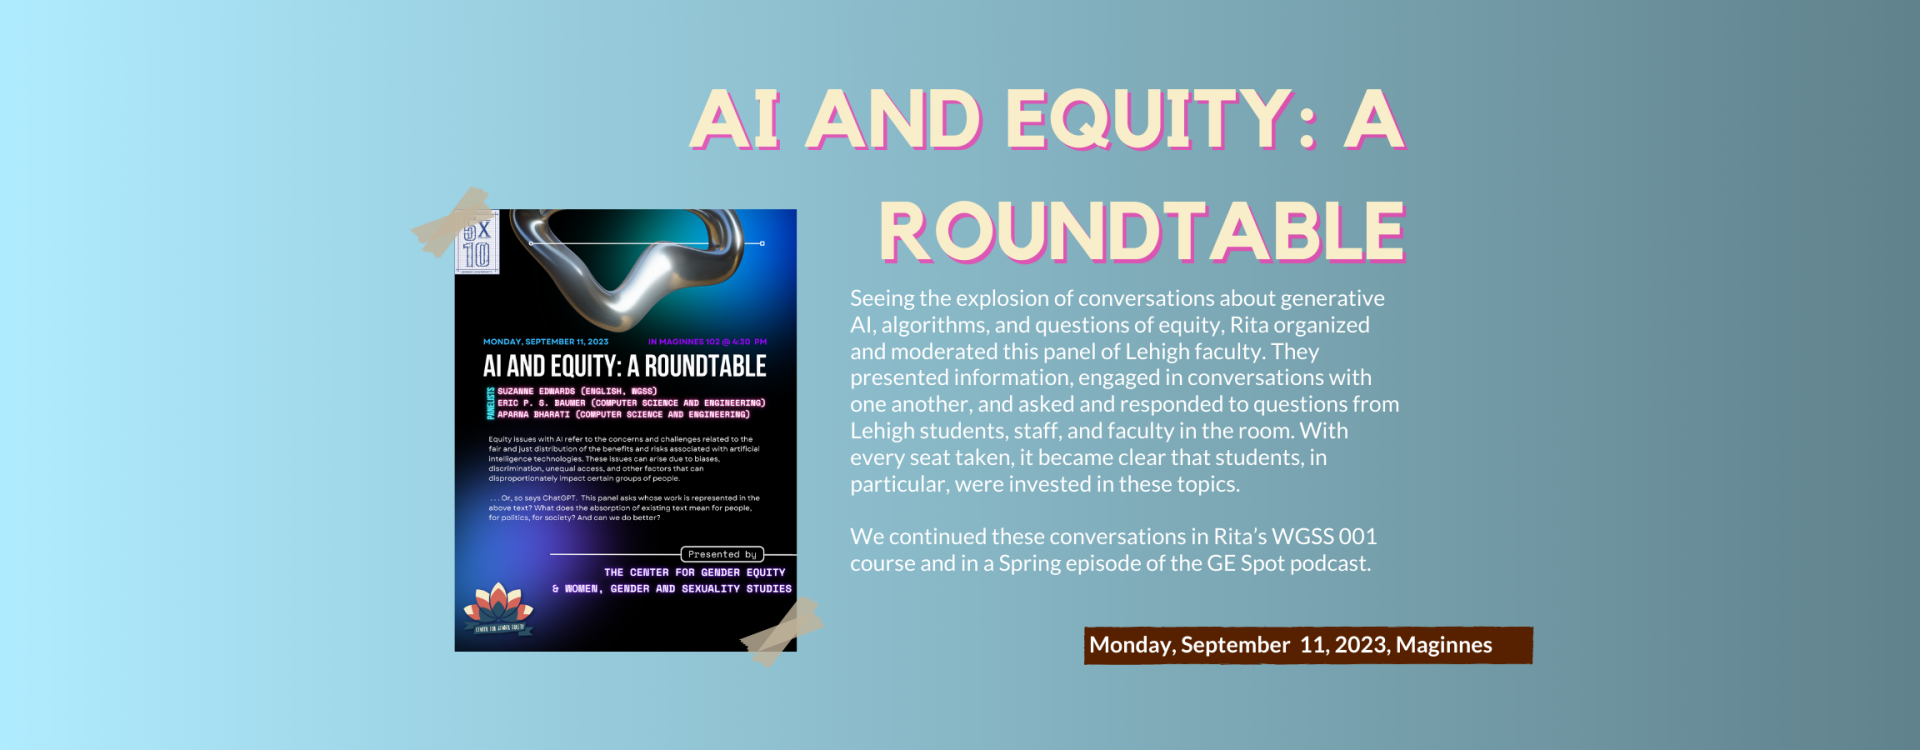 AI and Equity, A Round Table: Seeing the explosion of conversations about generative AI, algorithms, and questions of equity, Rita organized and moderated this panel of Lehigh faculty. They presented information, engaged in conversations with one another, and asked and responded to questions from Lehigh students, staff, and faculty in the room. With every seat taken, it became clear that students, in particular, were invested in these topics.  We continued these conversations in Rita’s WGSS 001 course and i